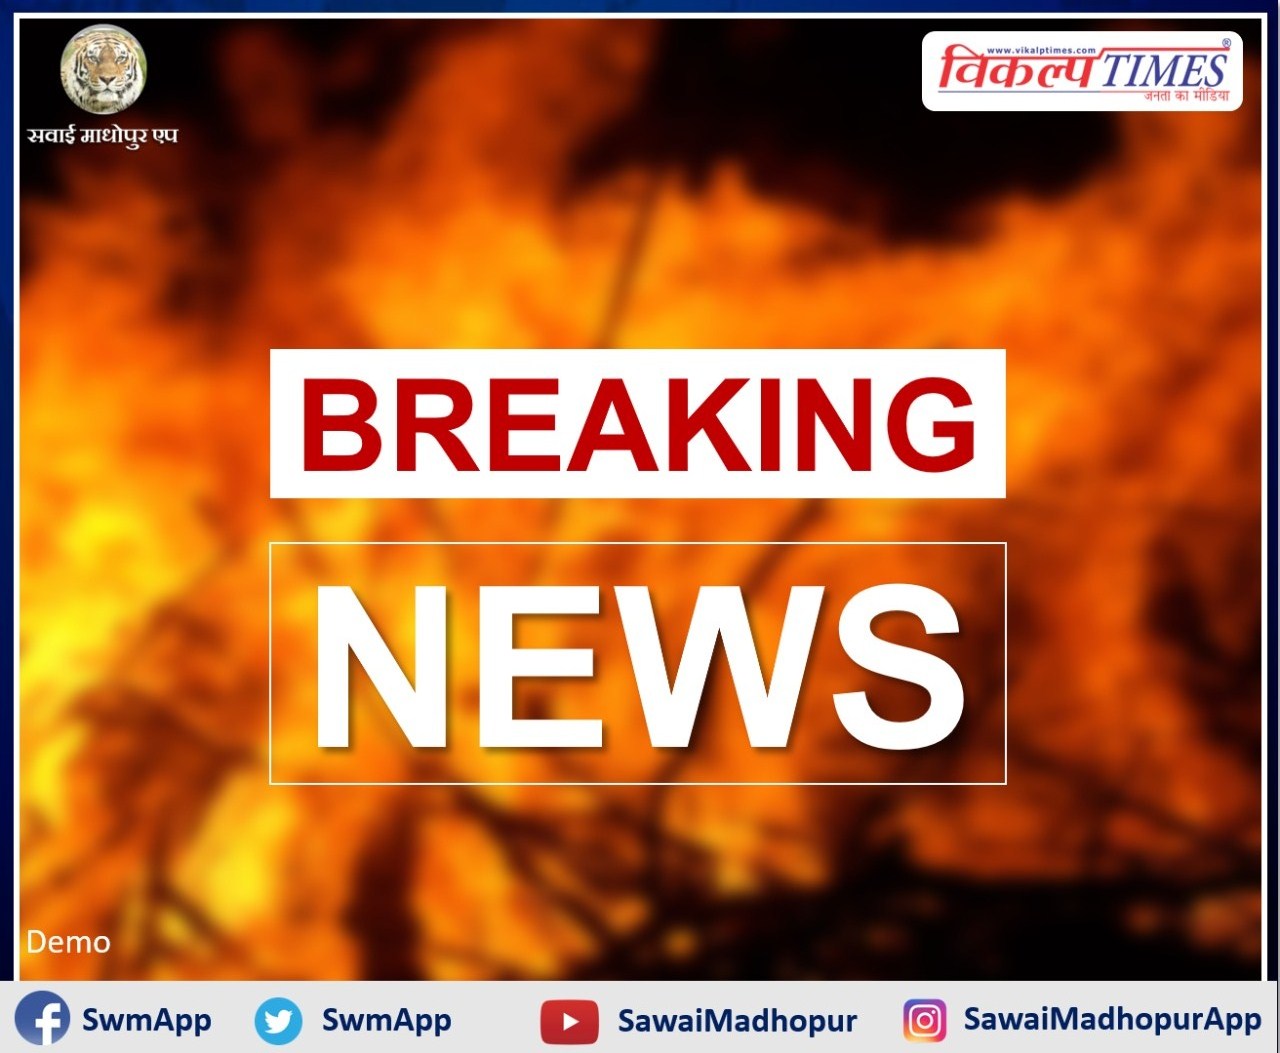 Due to unknown reasons, fire broke out in bamboo trees on Tonk - Sawai Madhopur highway